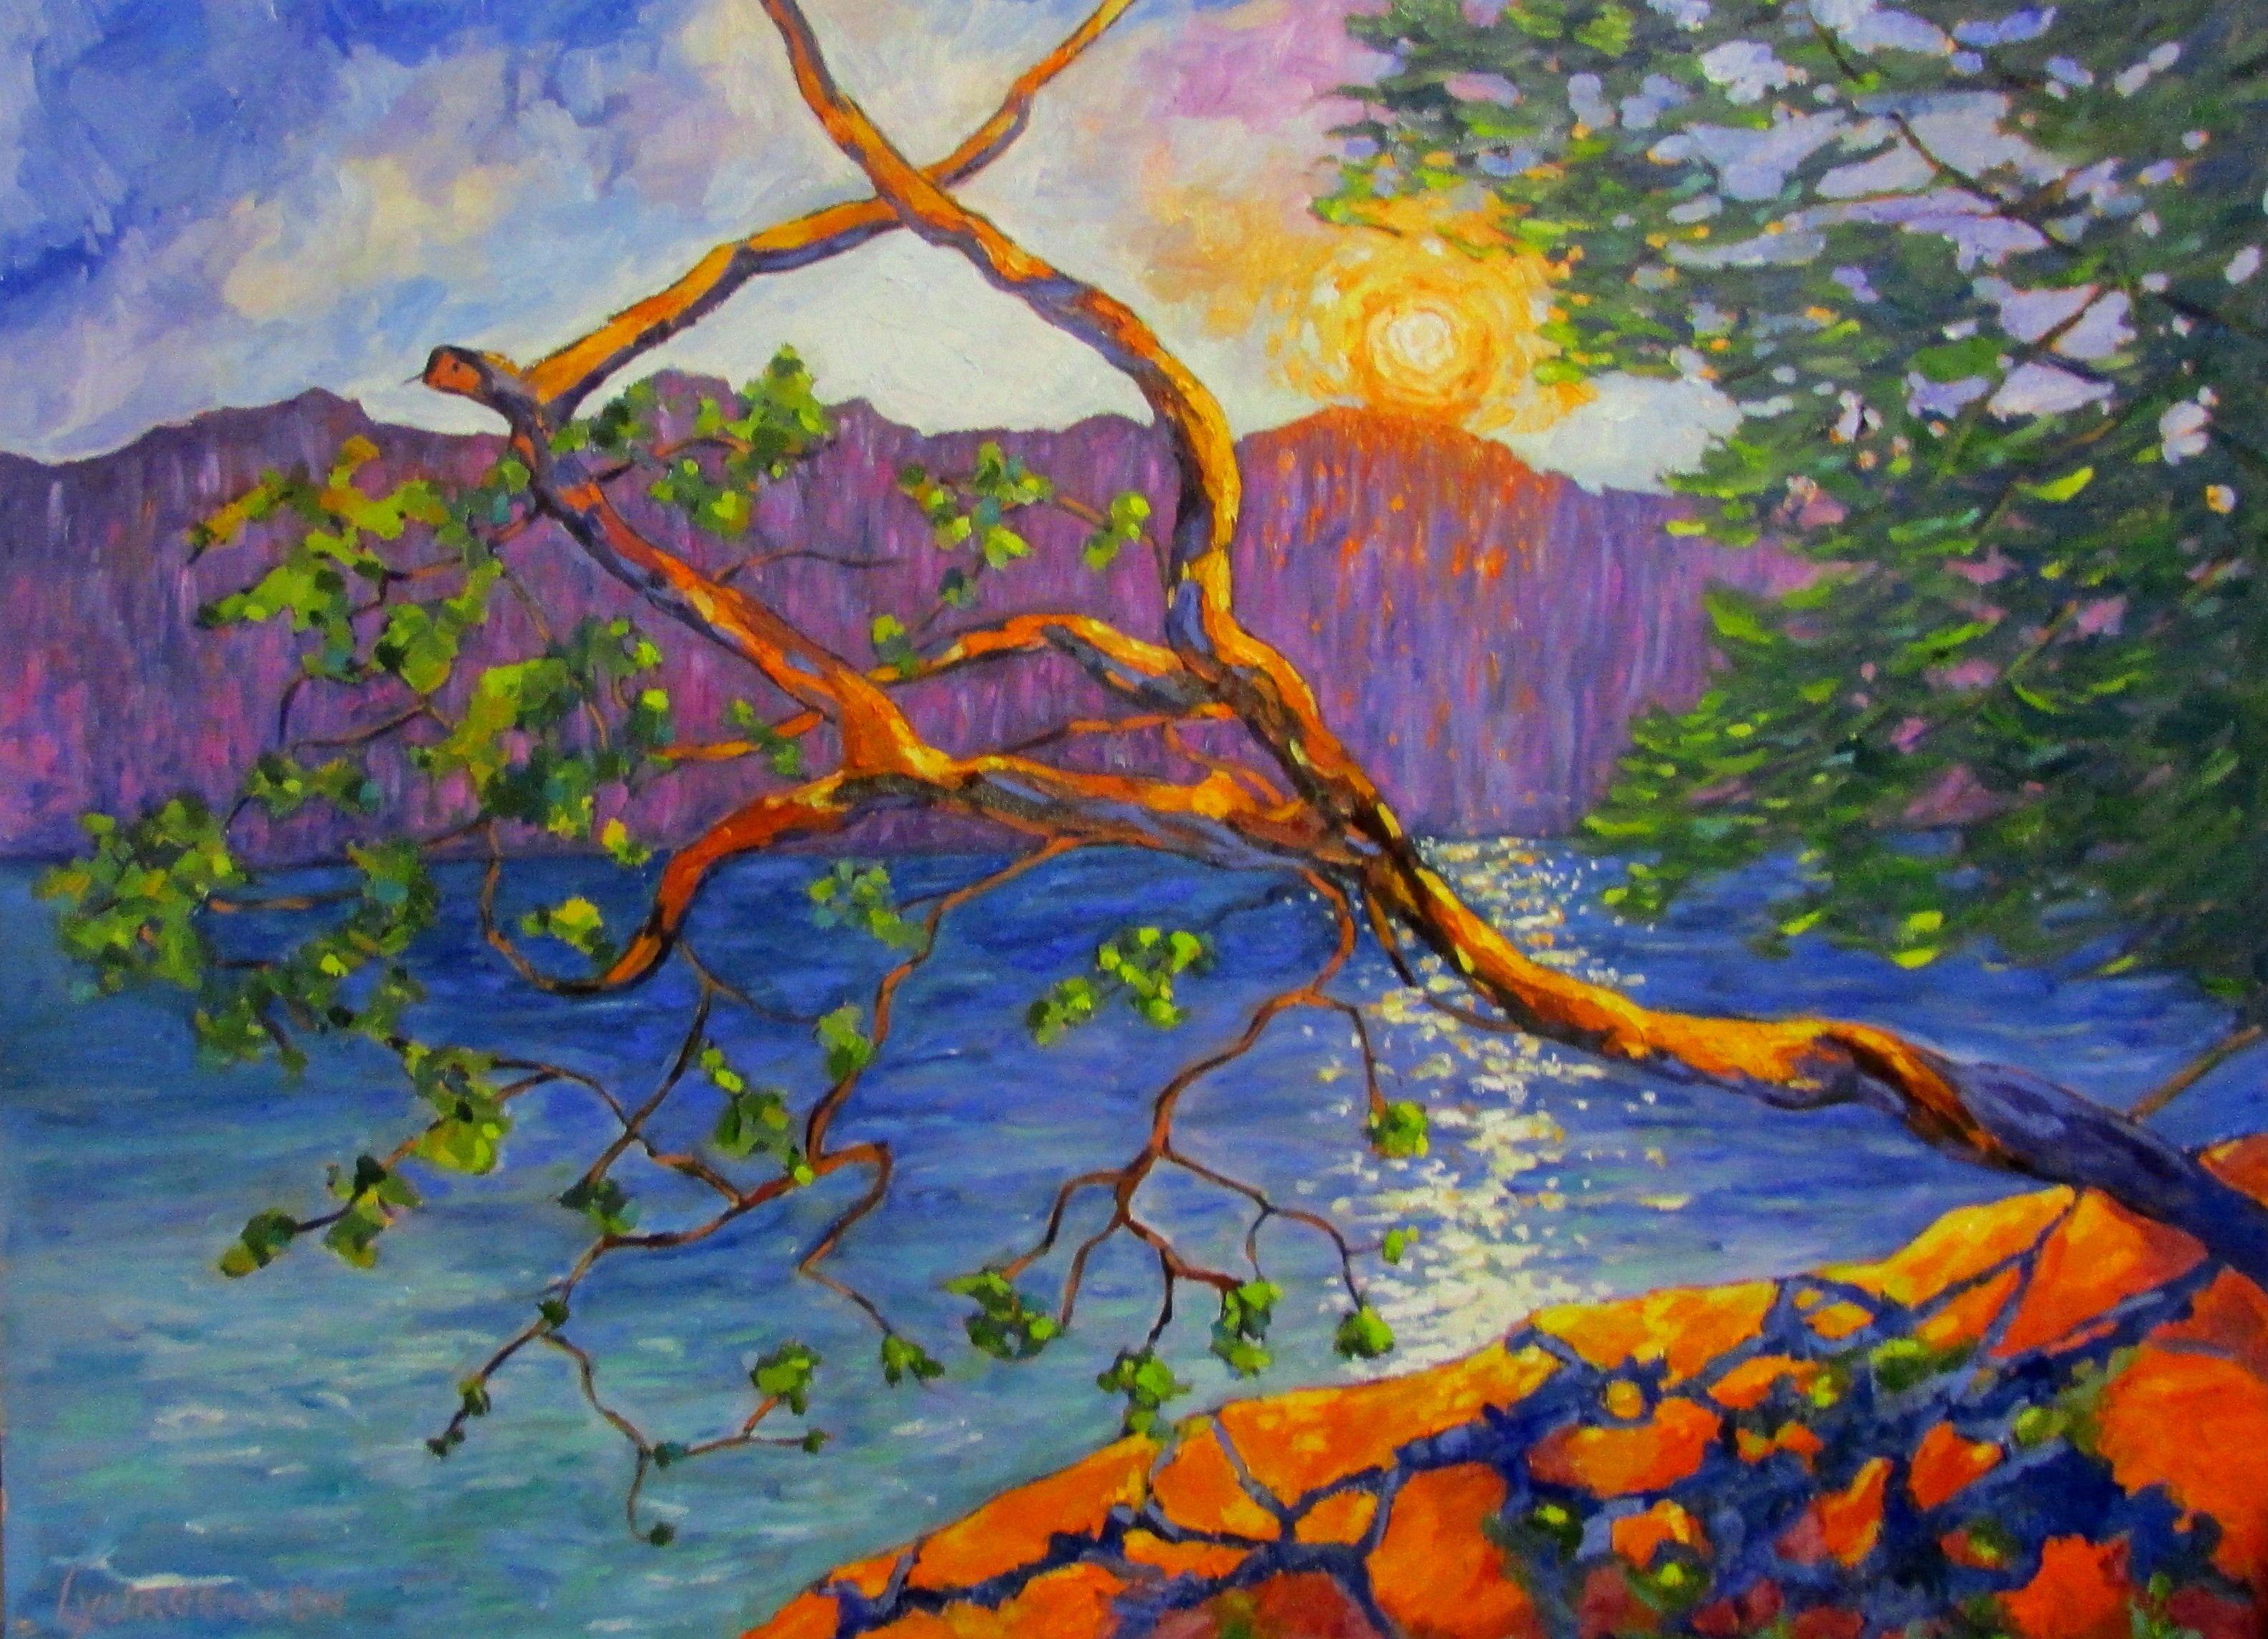 Arbutus trees are wonderfully colorful and expressive.  They grow all along the coast of Vancouver Island and the Gulf Islands and are a favorite subject to paint.  The colors and texture in this painting are vivid and thick and the sides of the